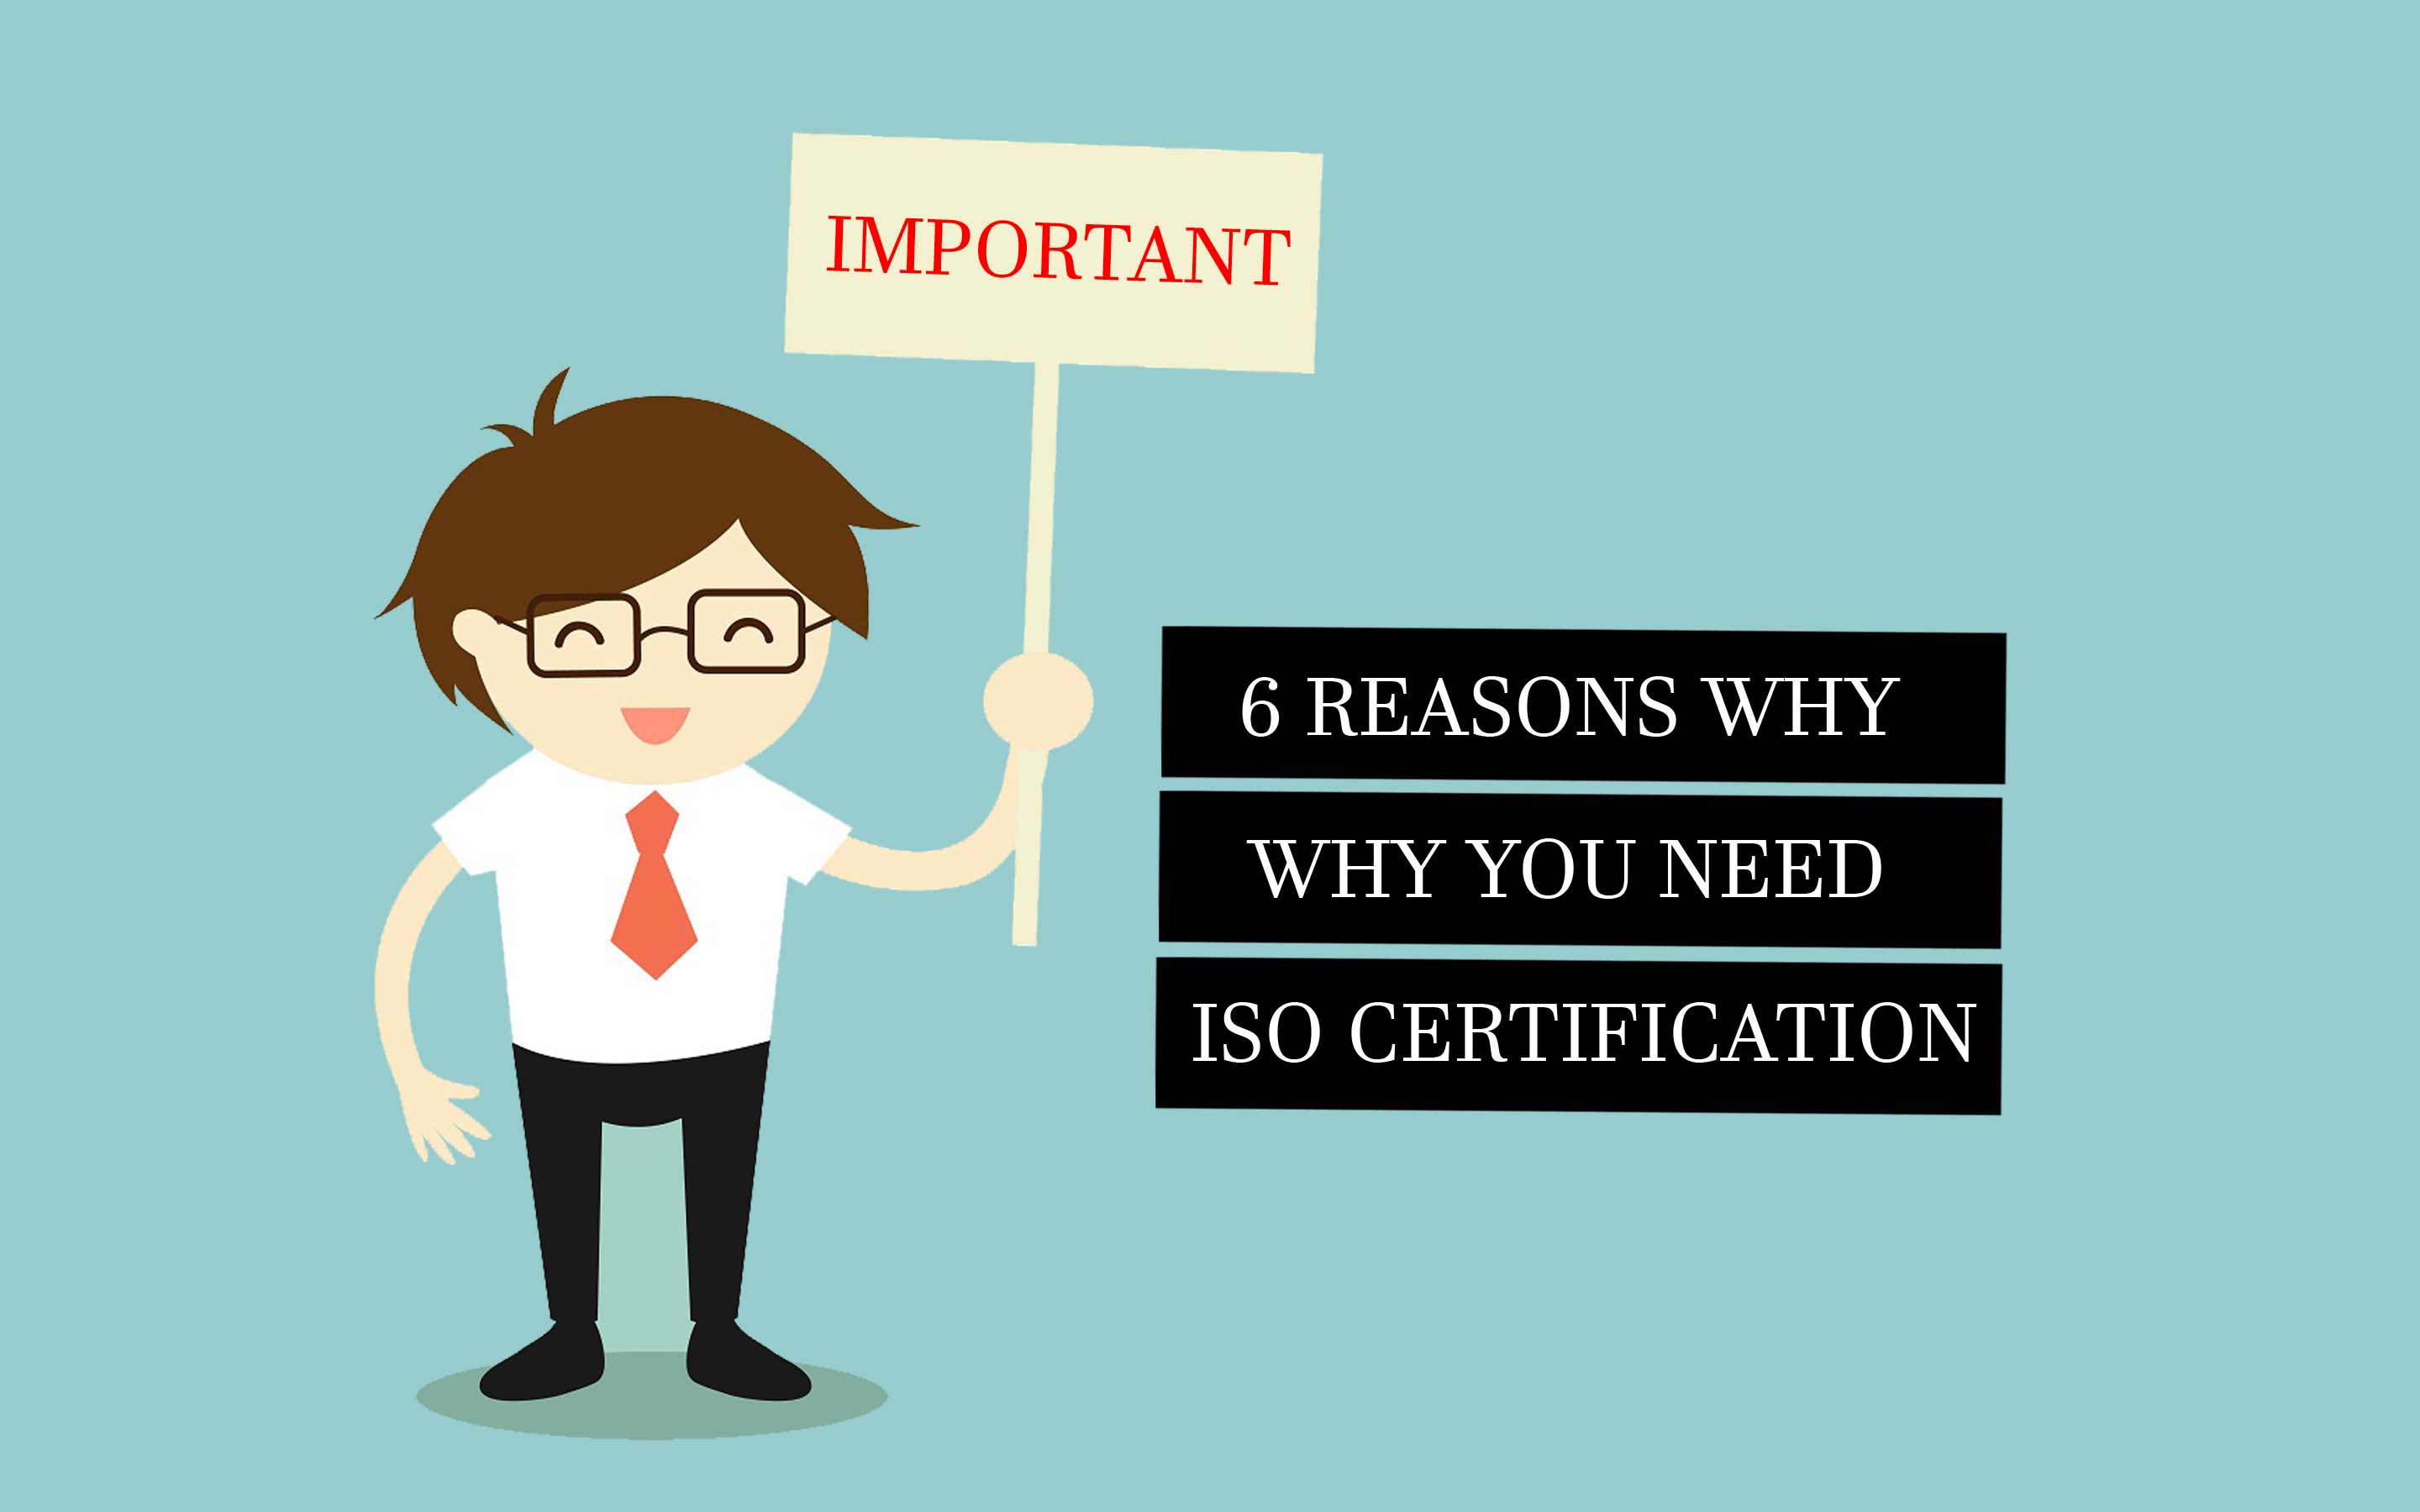 6 Reasons Why You Need ISO Certification